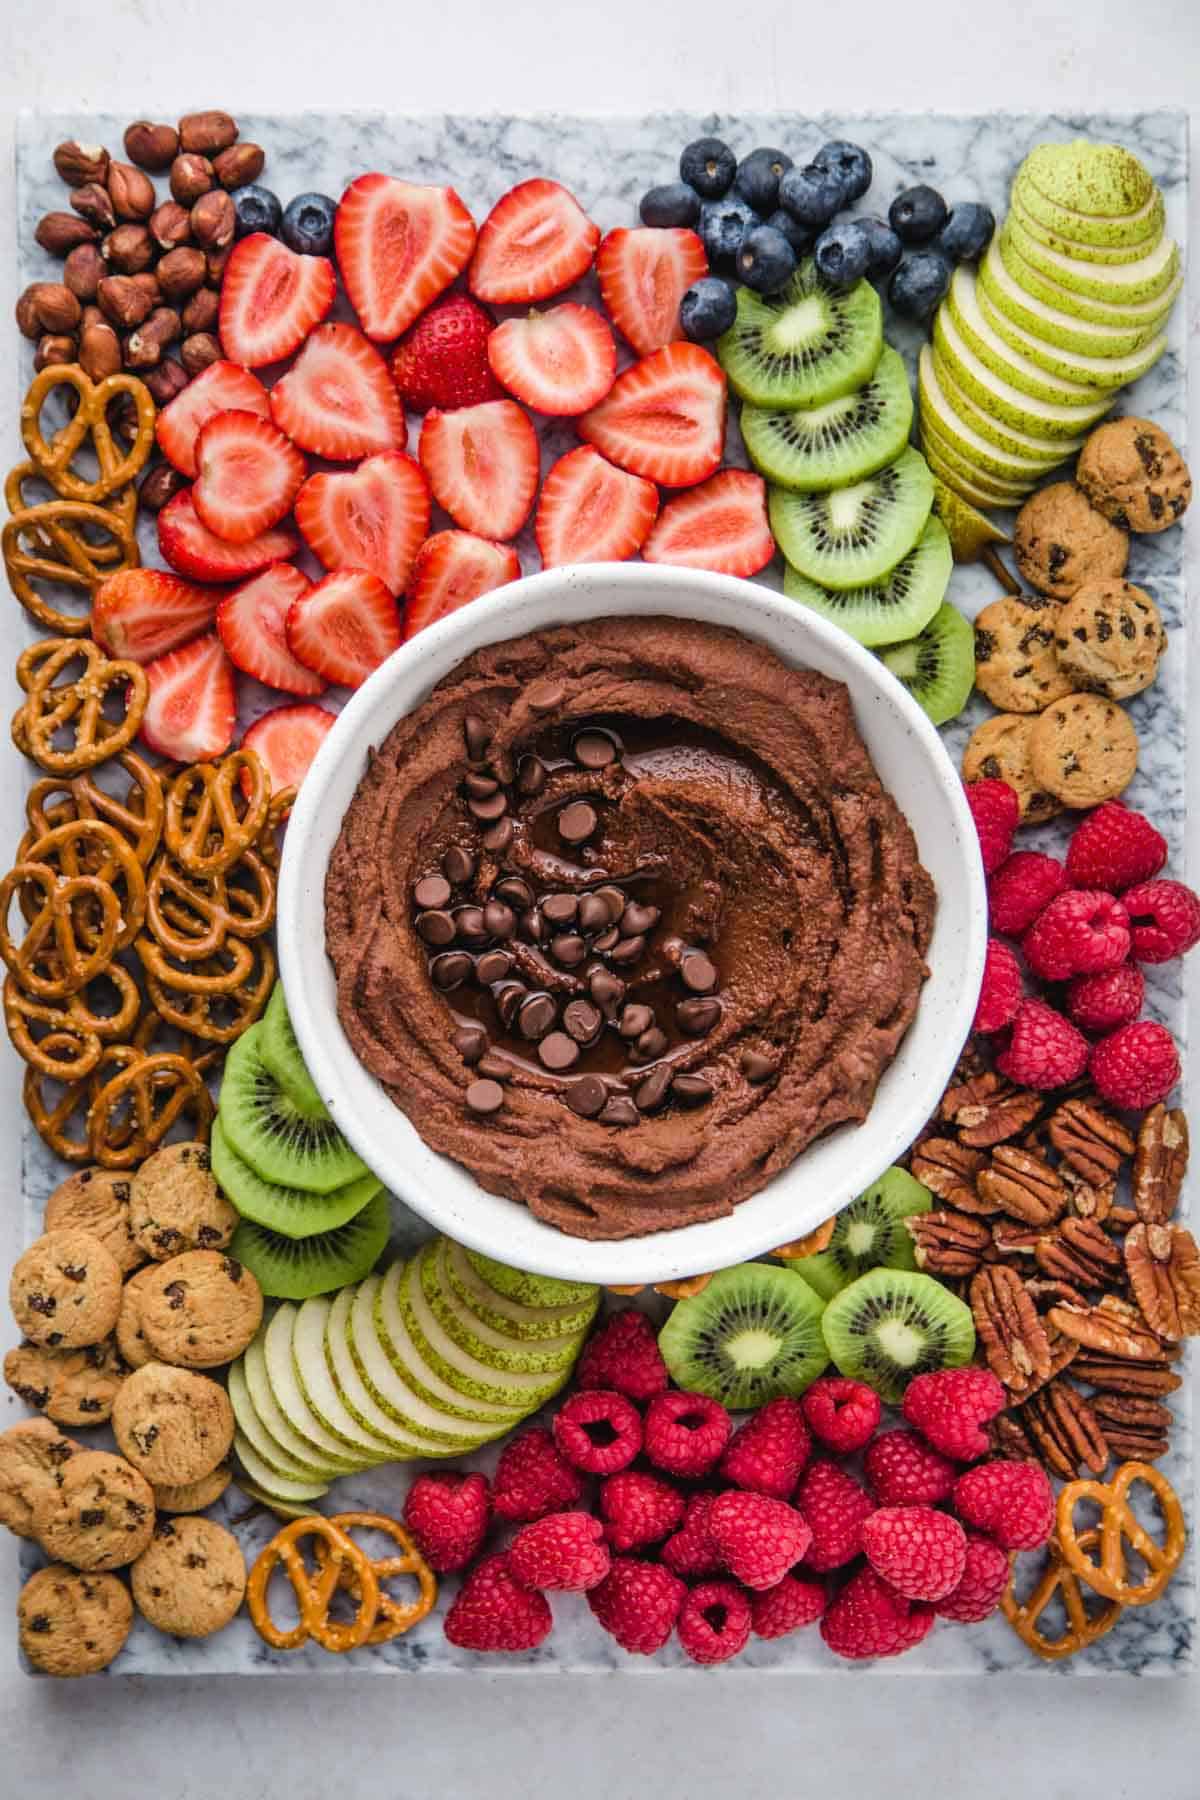 Chocolate Hummus and a fruit platter with strawberries, kiwi, blueberries, pear, pretzels, cookies, raspberries, and nuts.